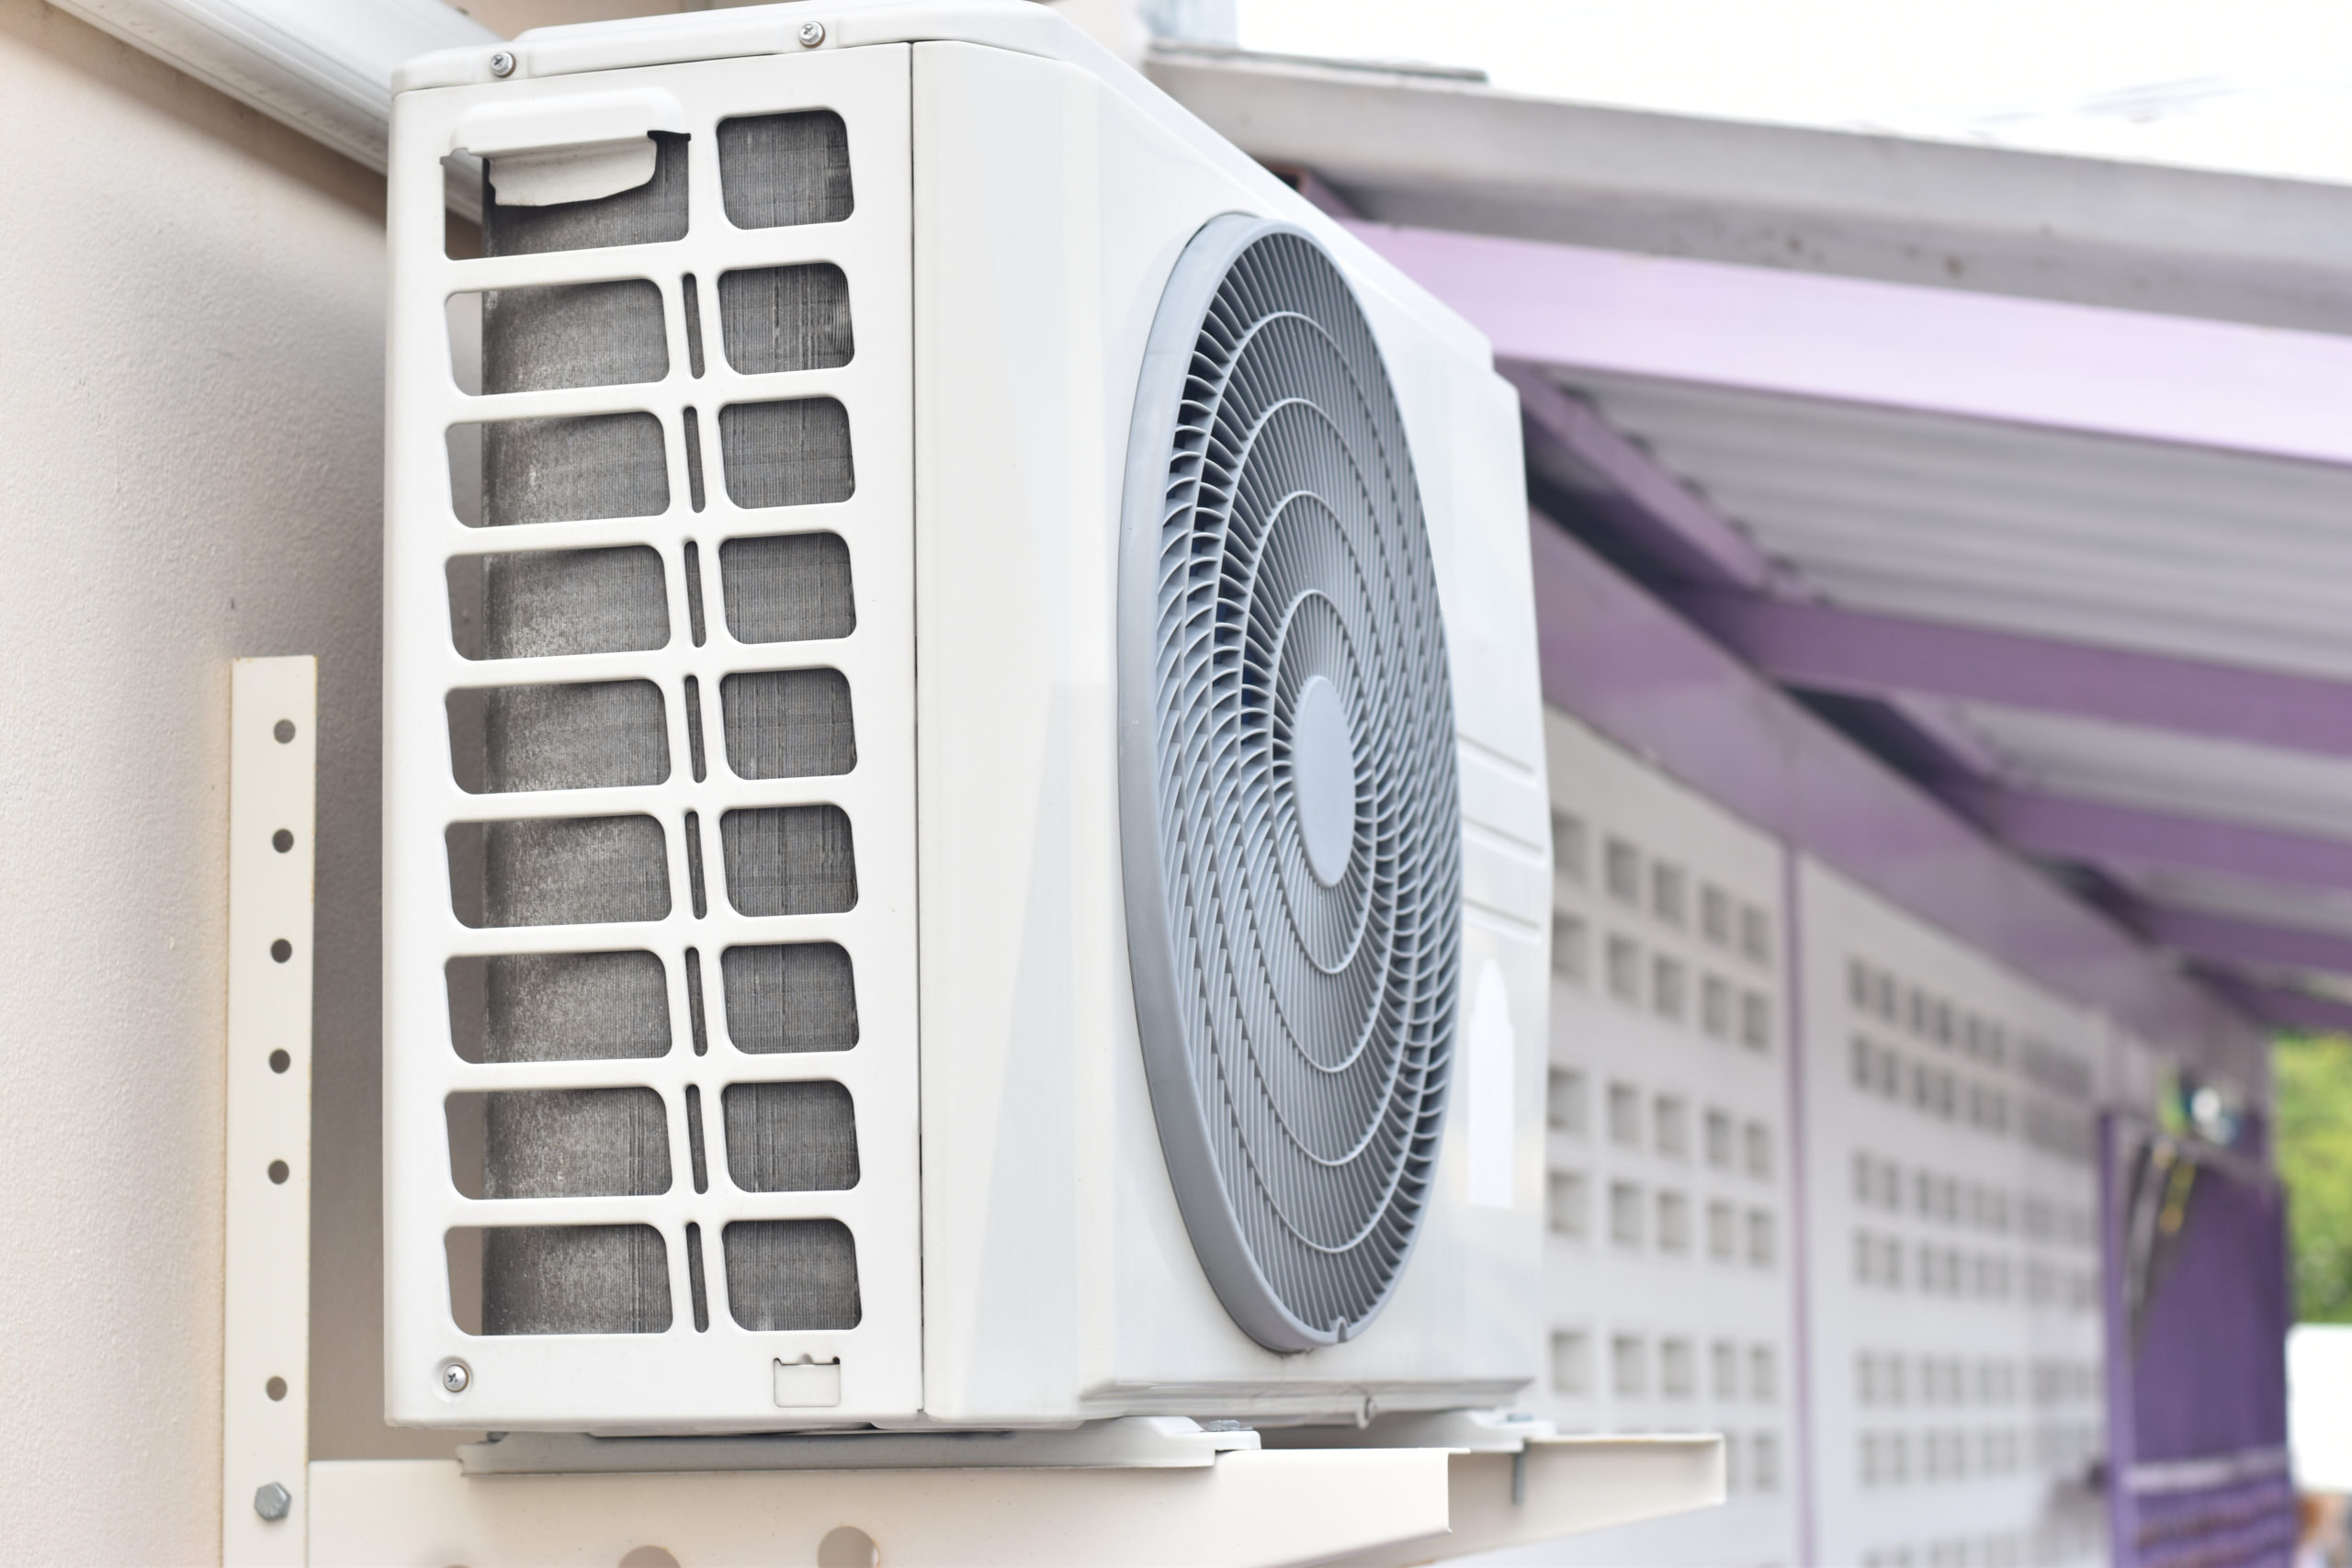 Hvac, heating, cooling, ac, furnace, ductless, ductless system, mini-split, mini-split unit, ductless hvac system